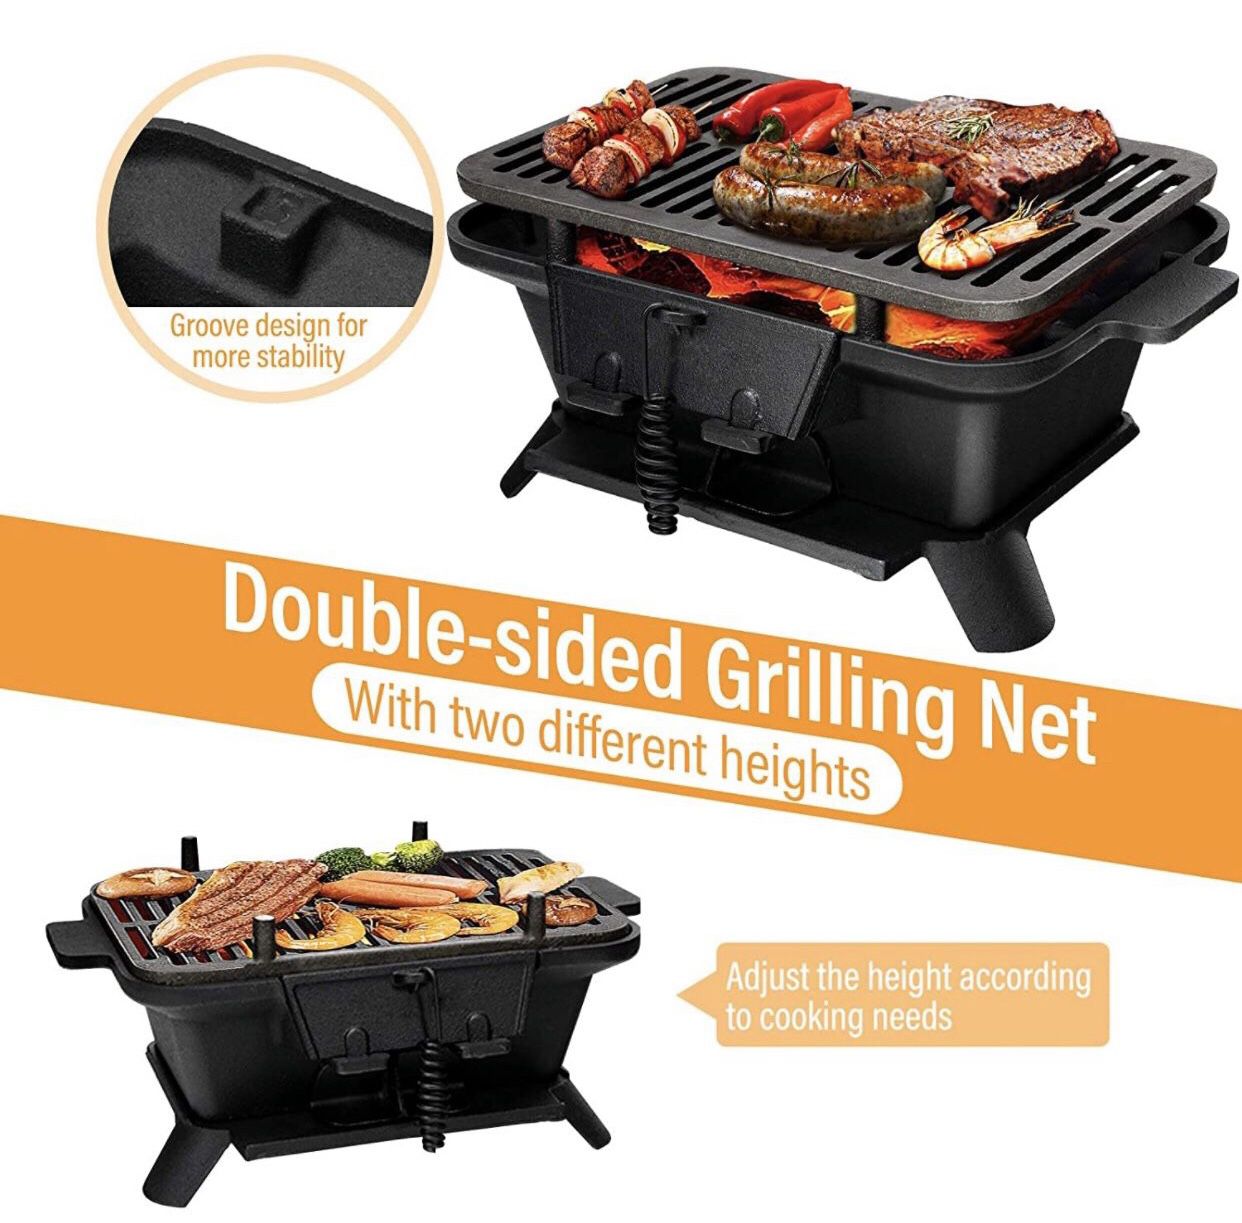 Giantex Charcoal Grill Hibachi Grill, Portable Cast Iron Grill with Double-sided Grilling Net, Air Regulating Door, Fire Gate, BBQ Grill